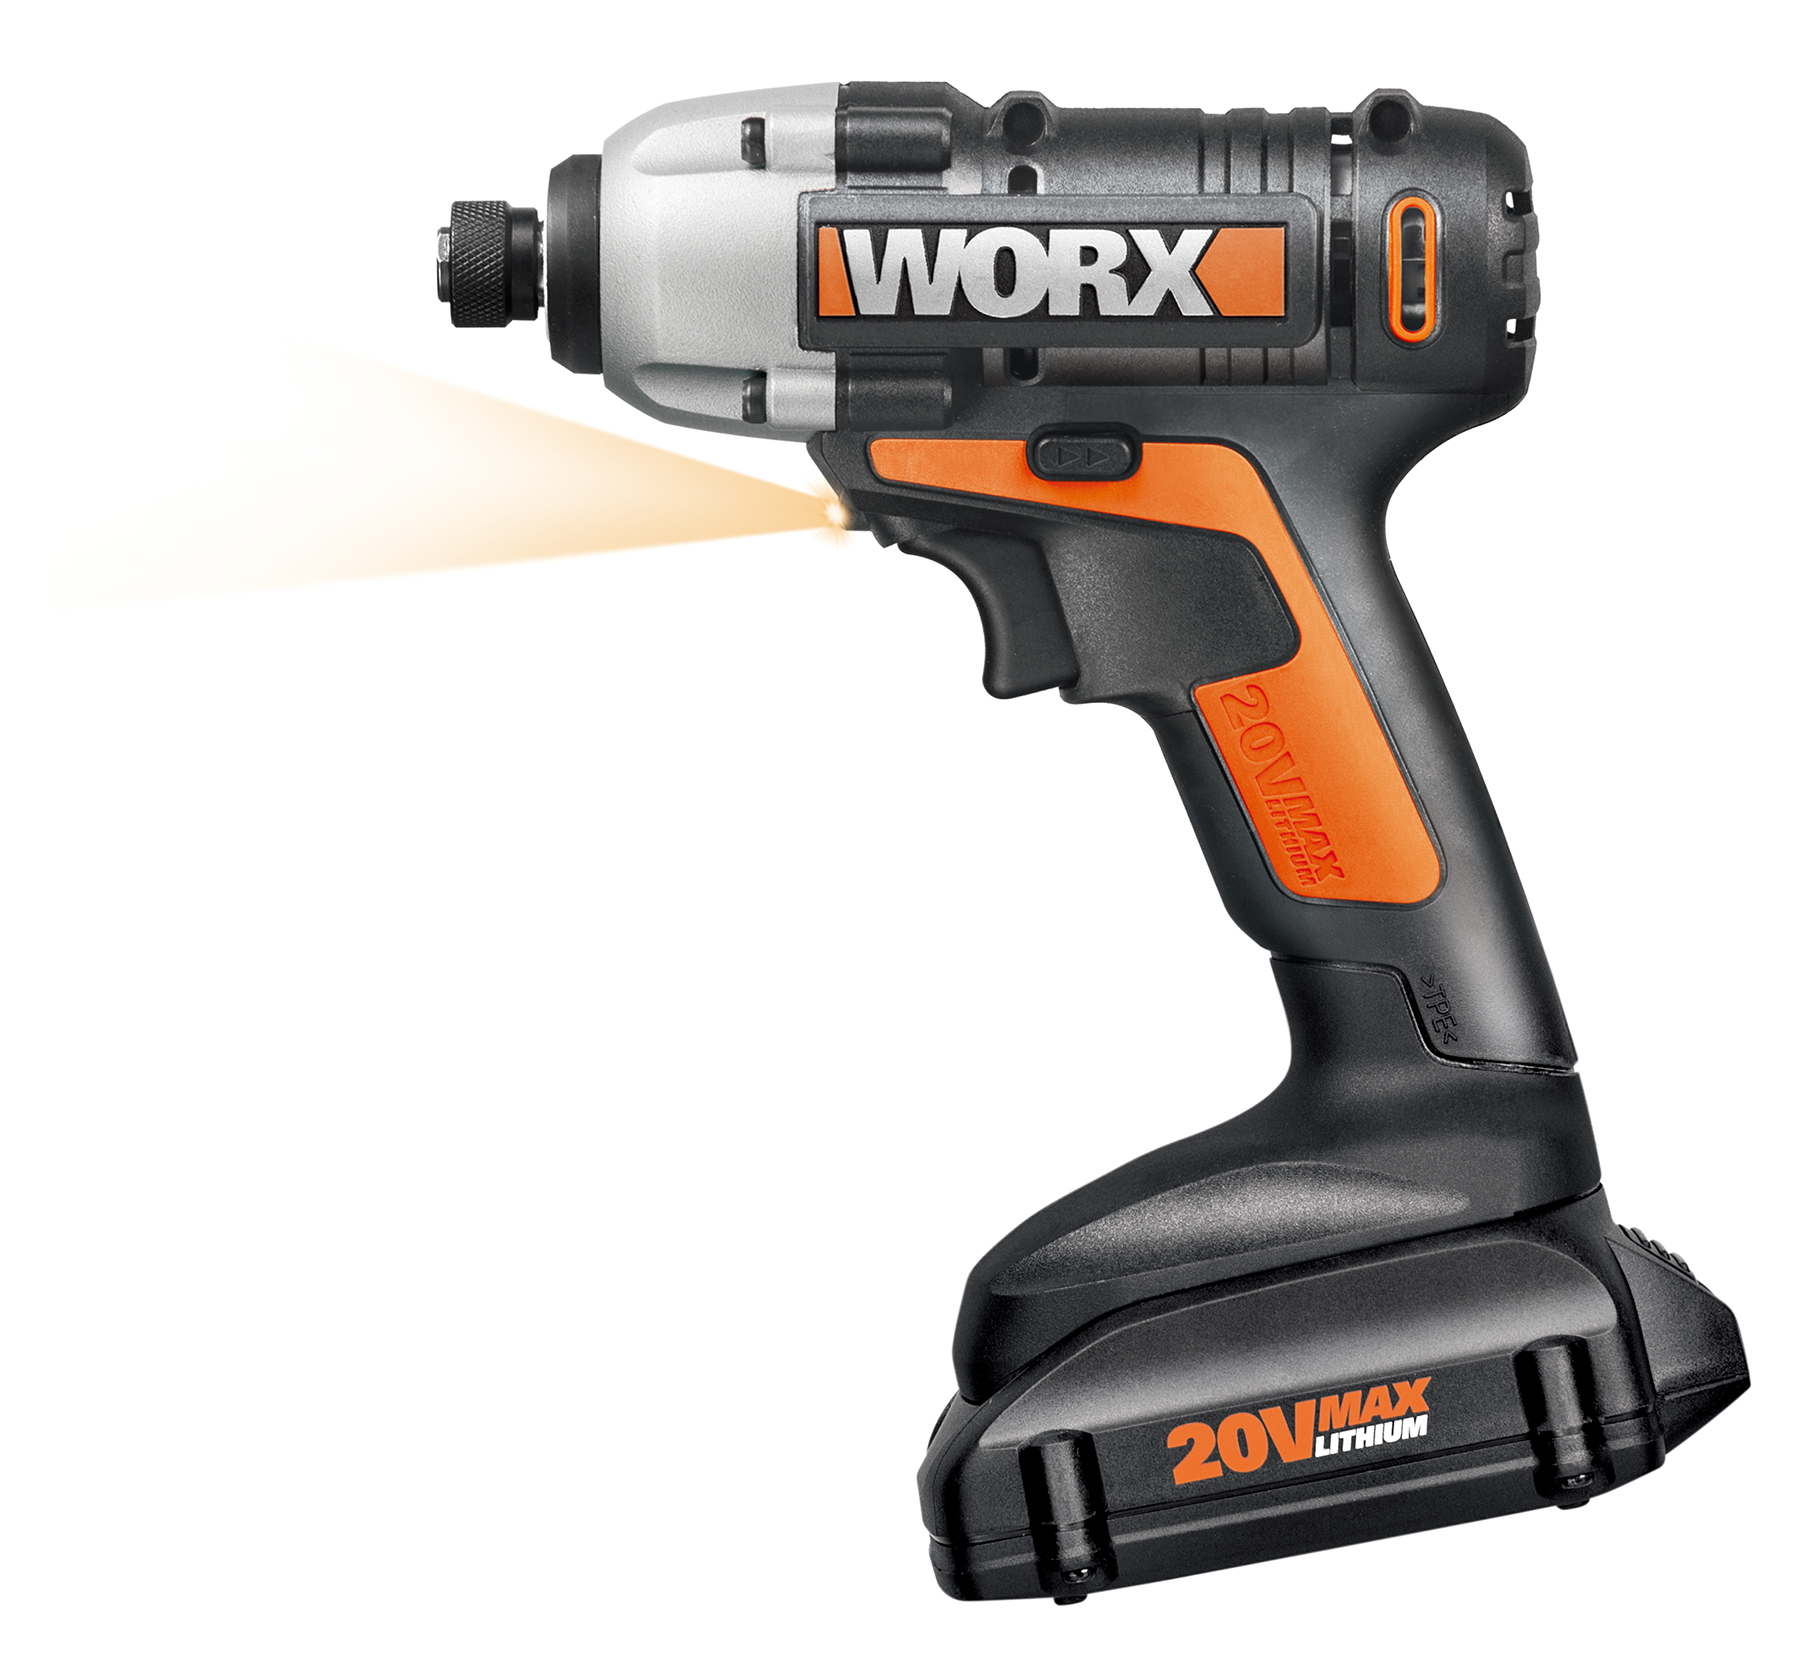 The WORX 20V Impact Driver's compact design and short headstock allow easy access in tight quarters.